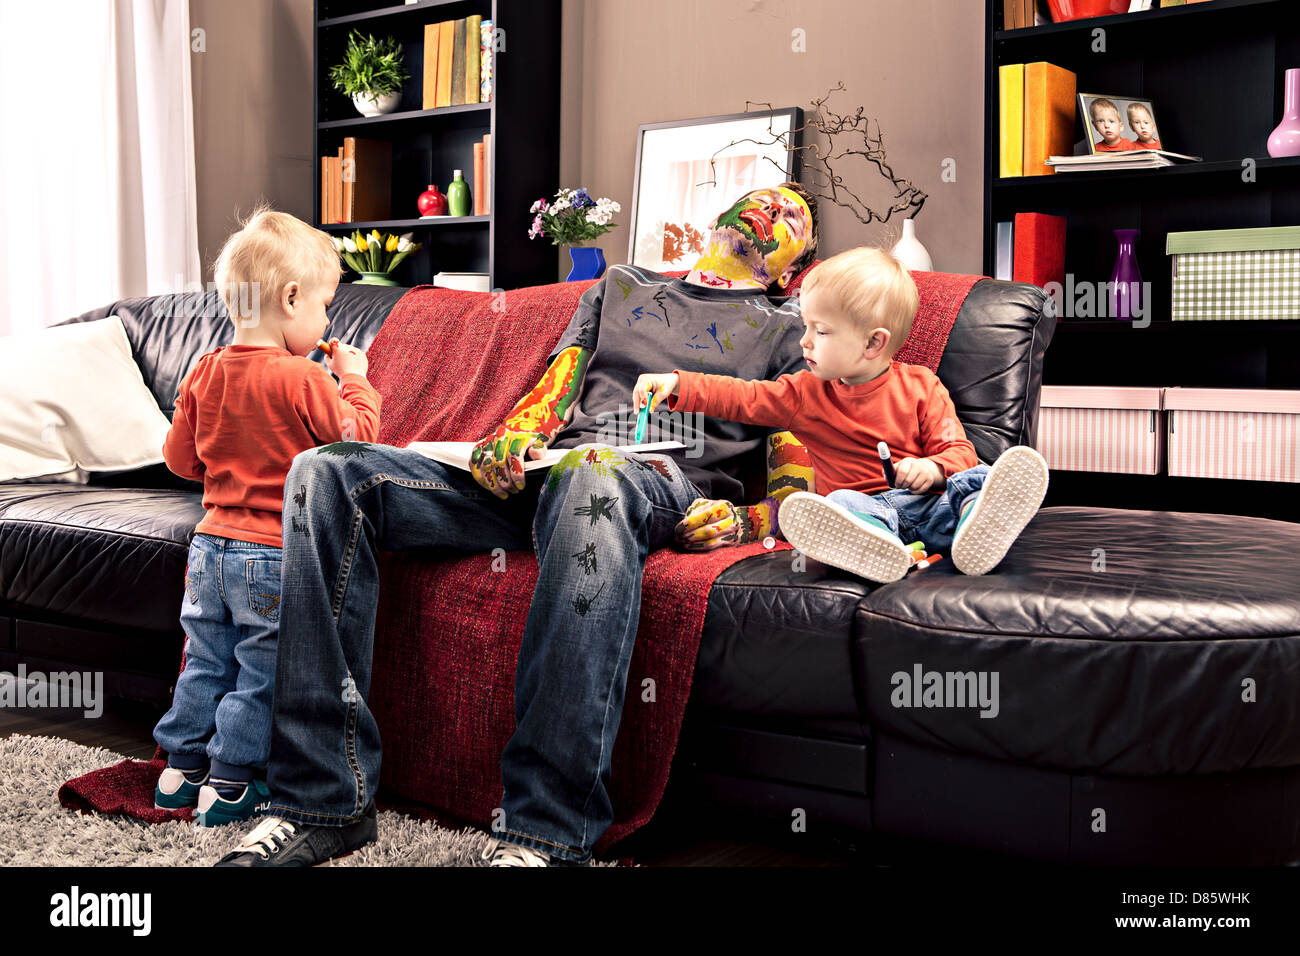 two toddler twins painting on their sleeping father Stock Photo